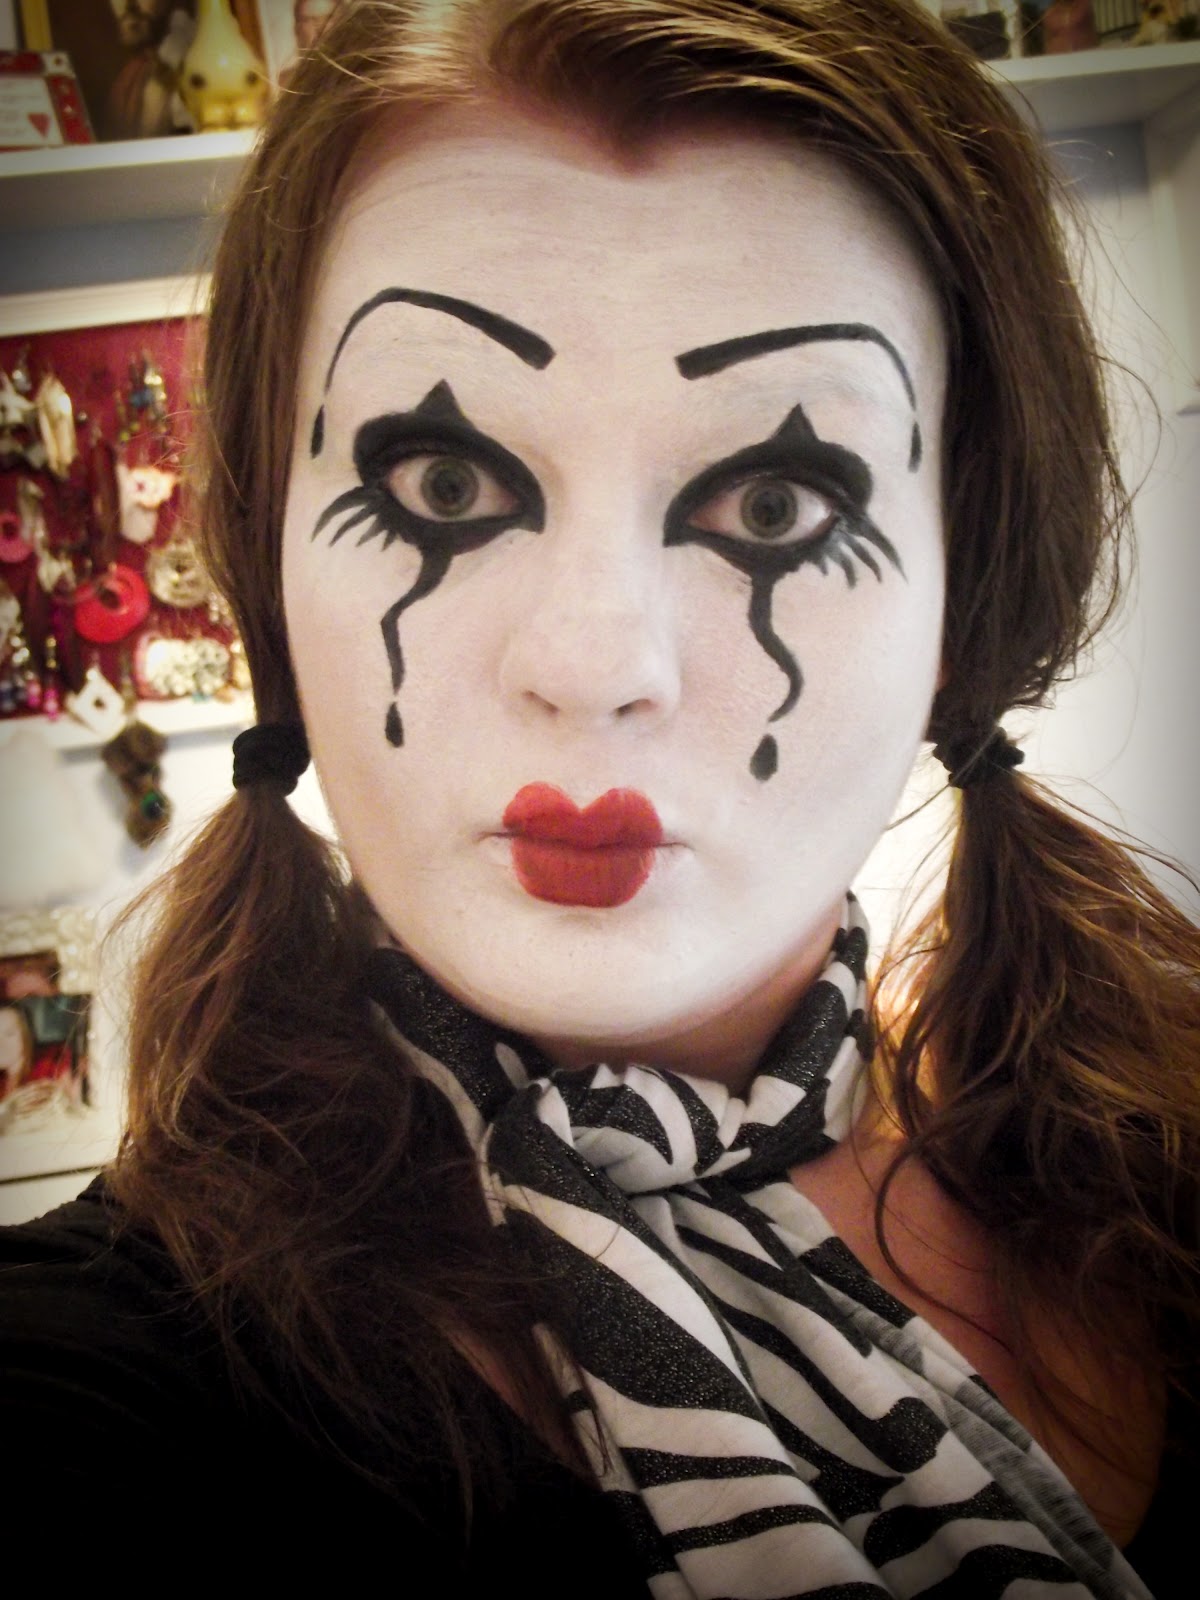 Mimes the word!